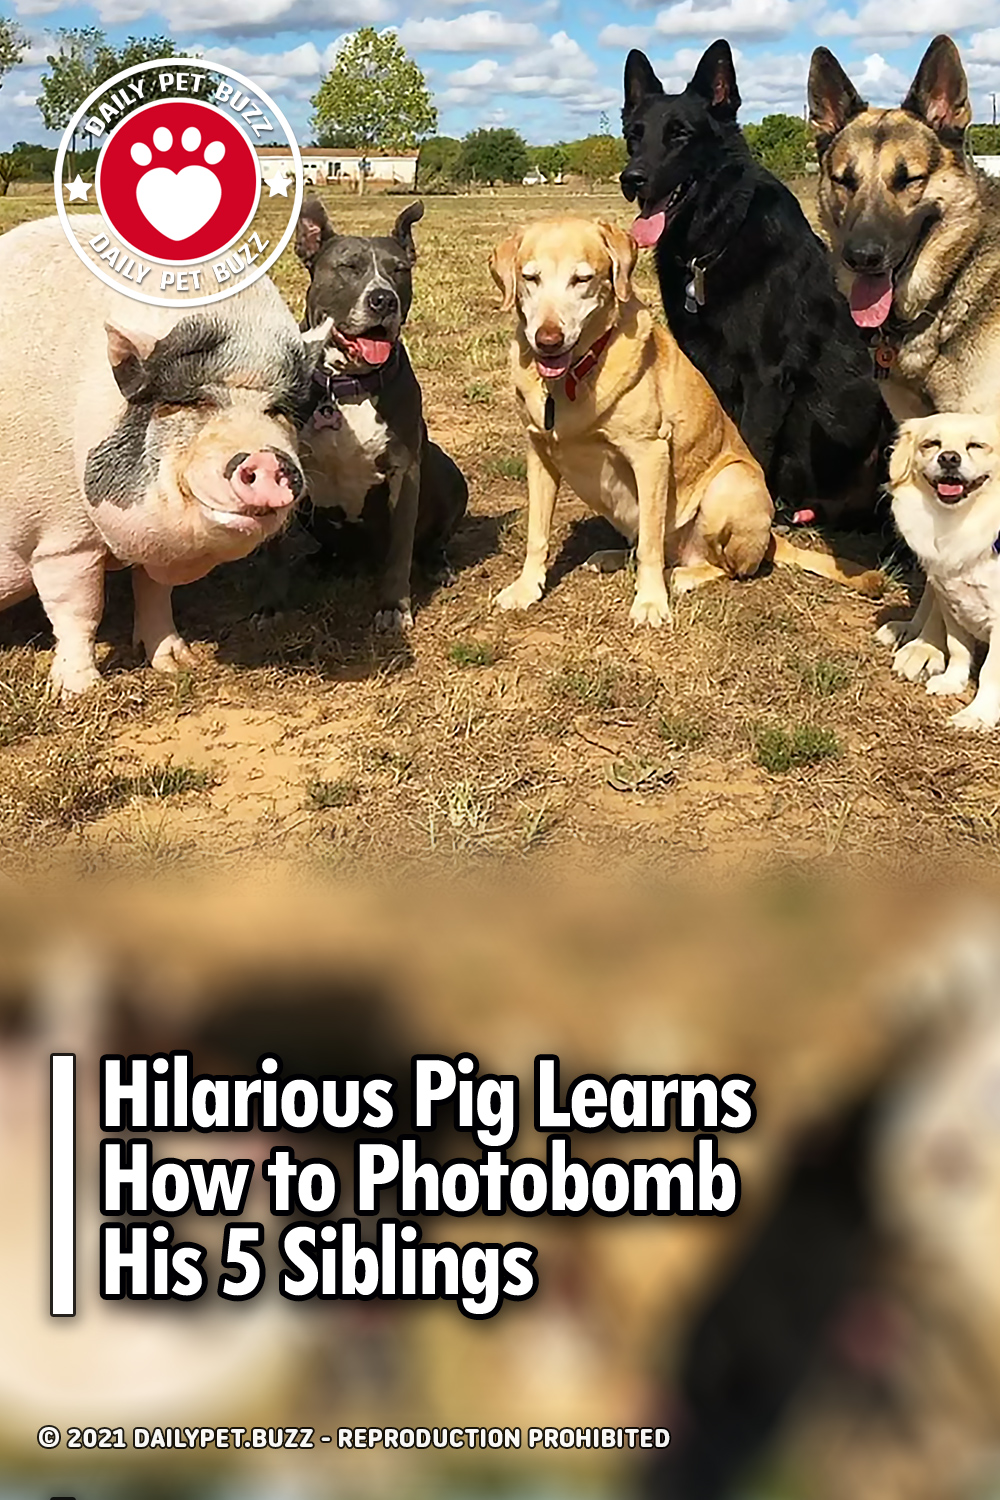 Hilarious Pig Learns How to Photobomb His 5 Siblings